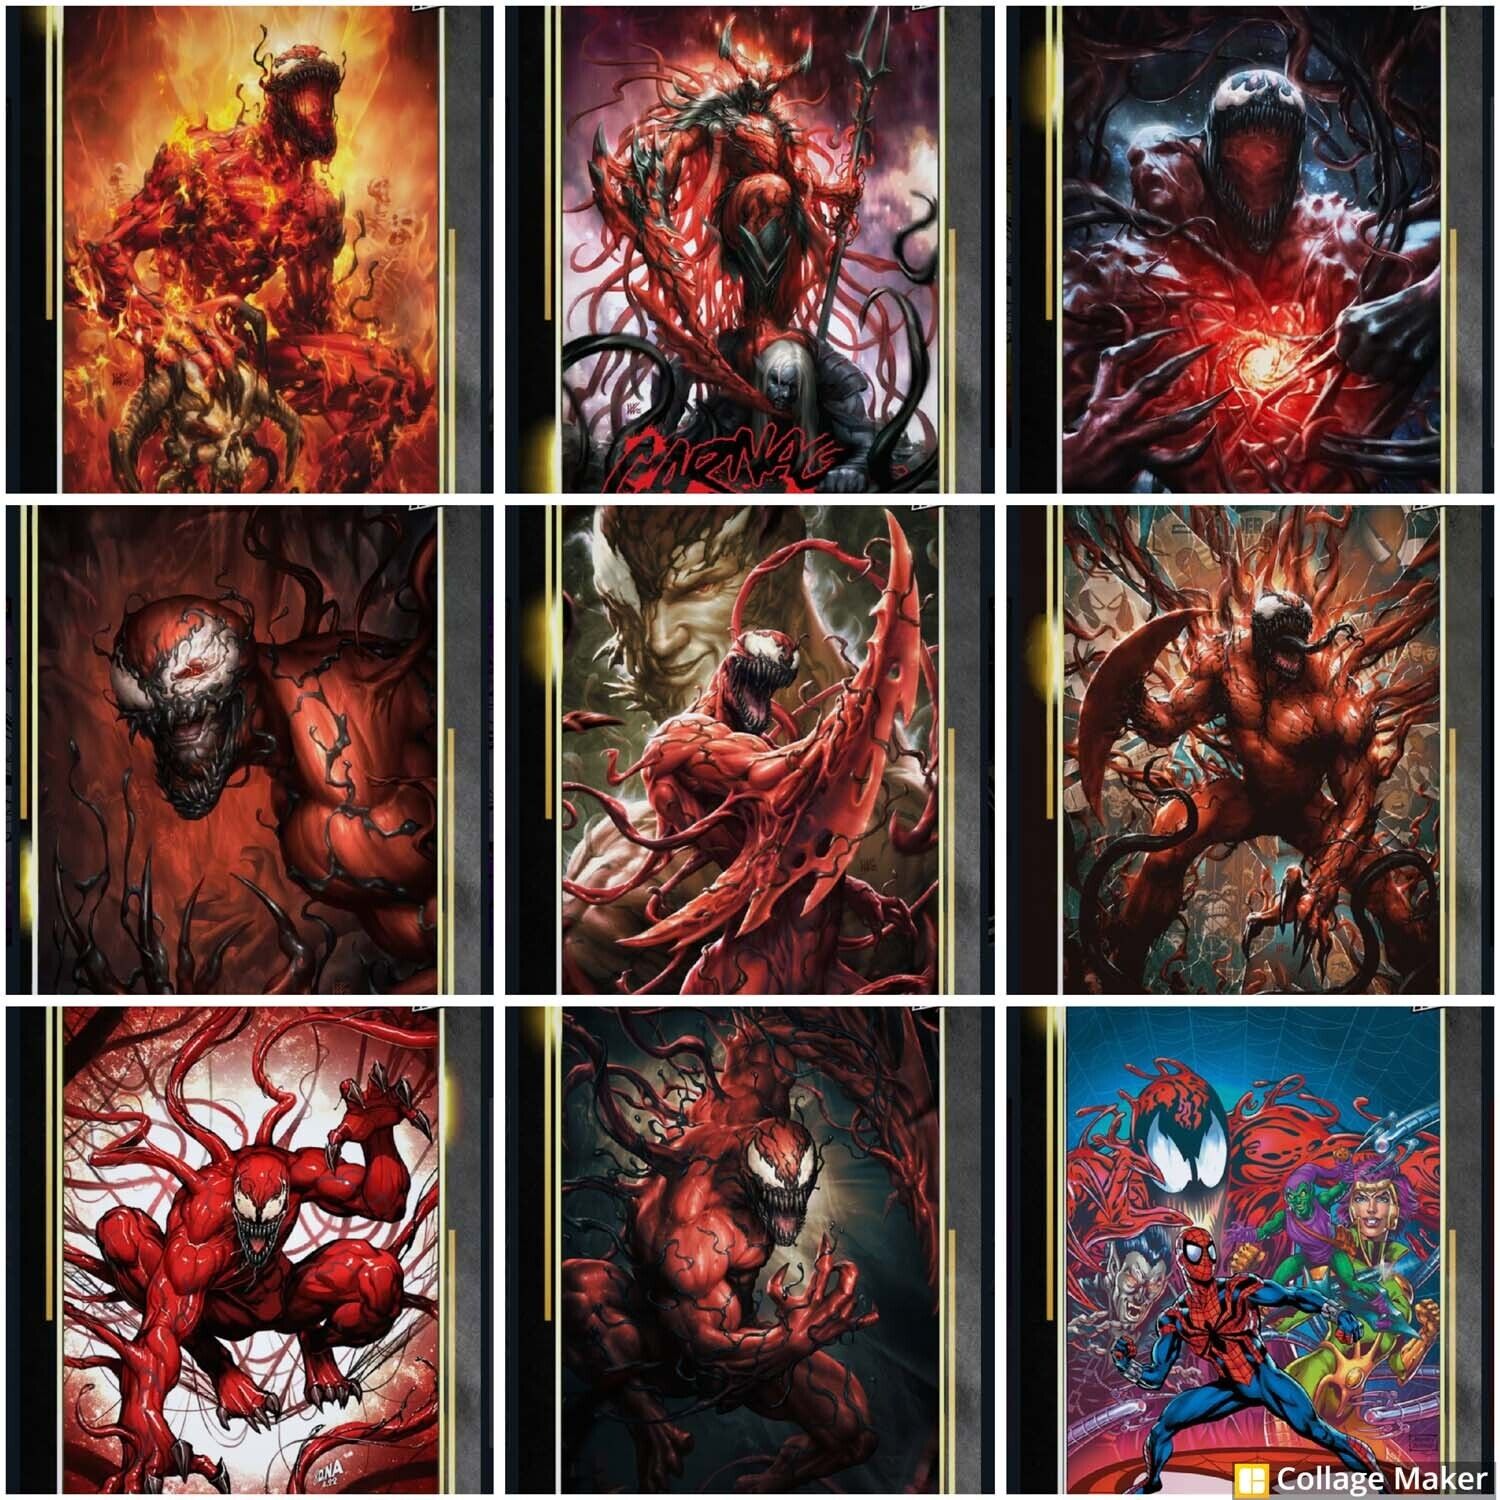 Lot of 9 CARNAGE Topps Marvel Collect NOW GOLD SR Cards + 9 FREE RARE NEEDS